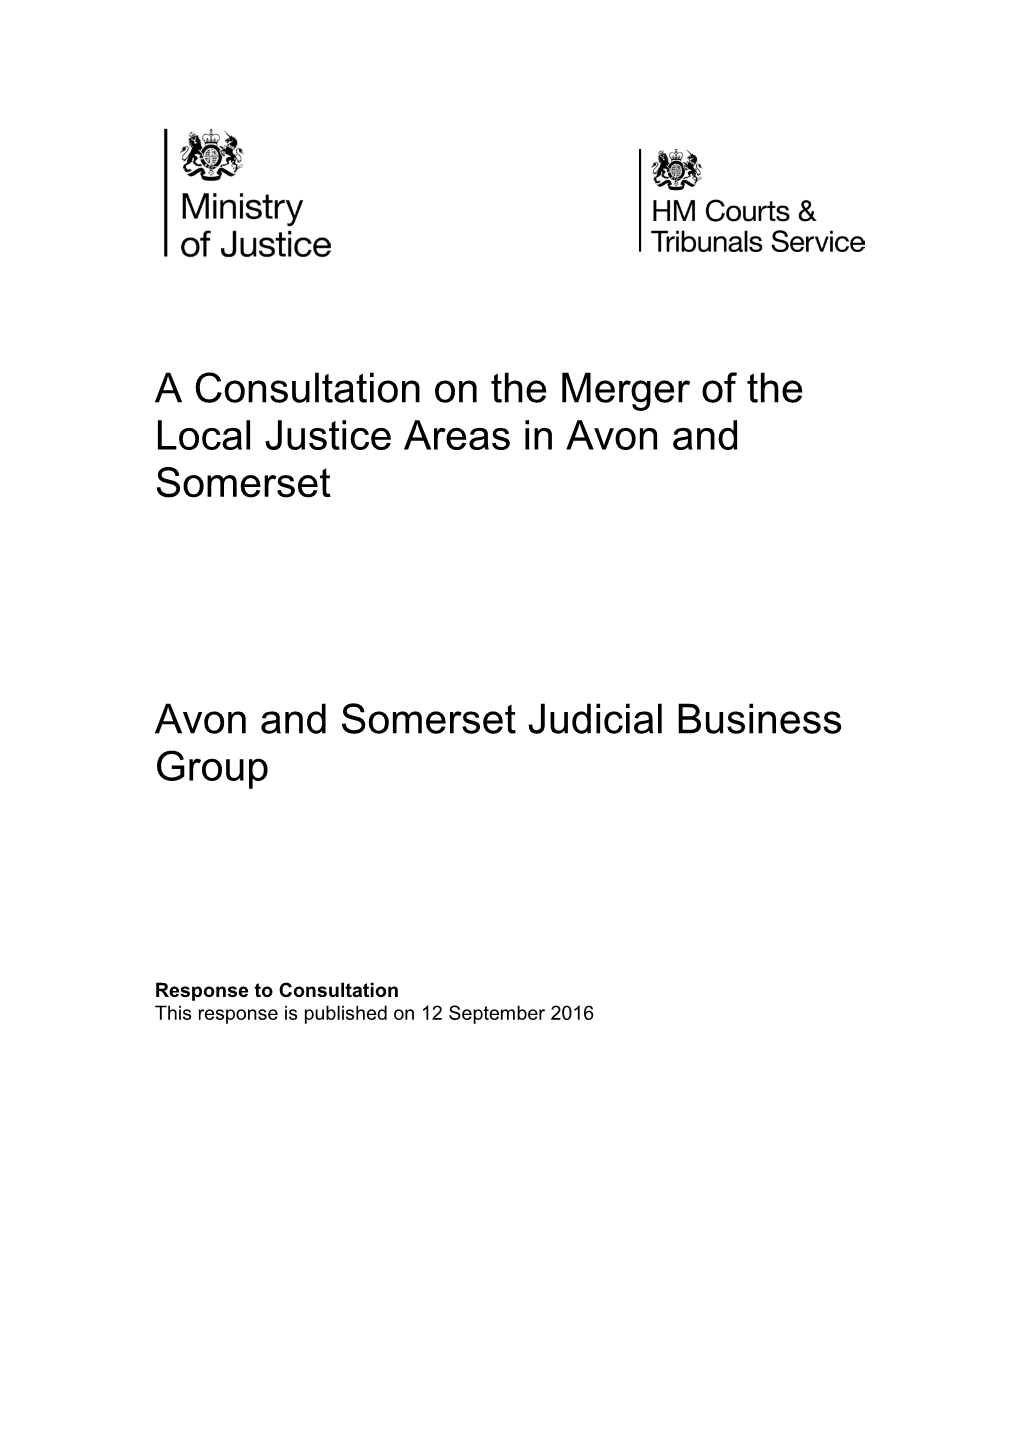 A Consultation on the Merger of the Local Justice Areas in Avon and Somerset